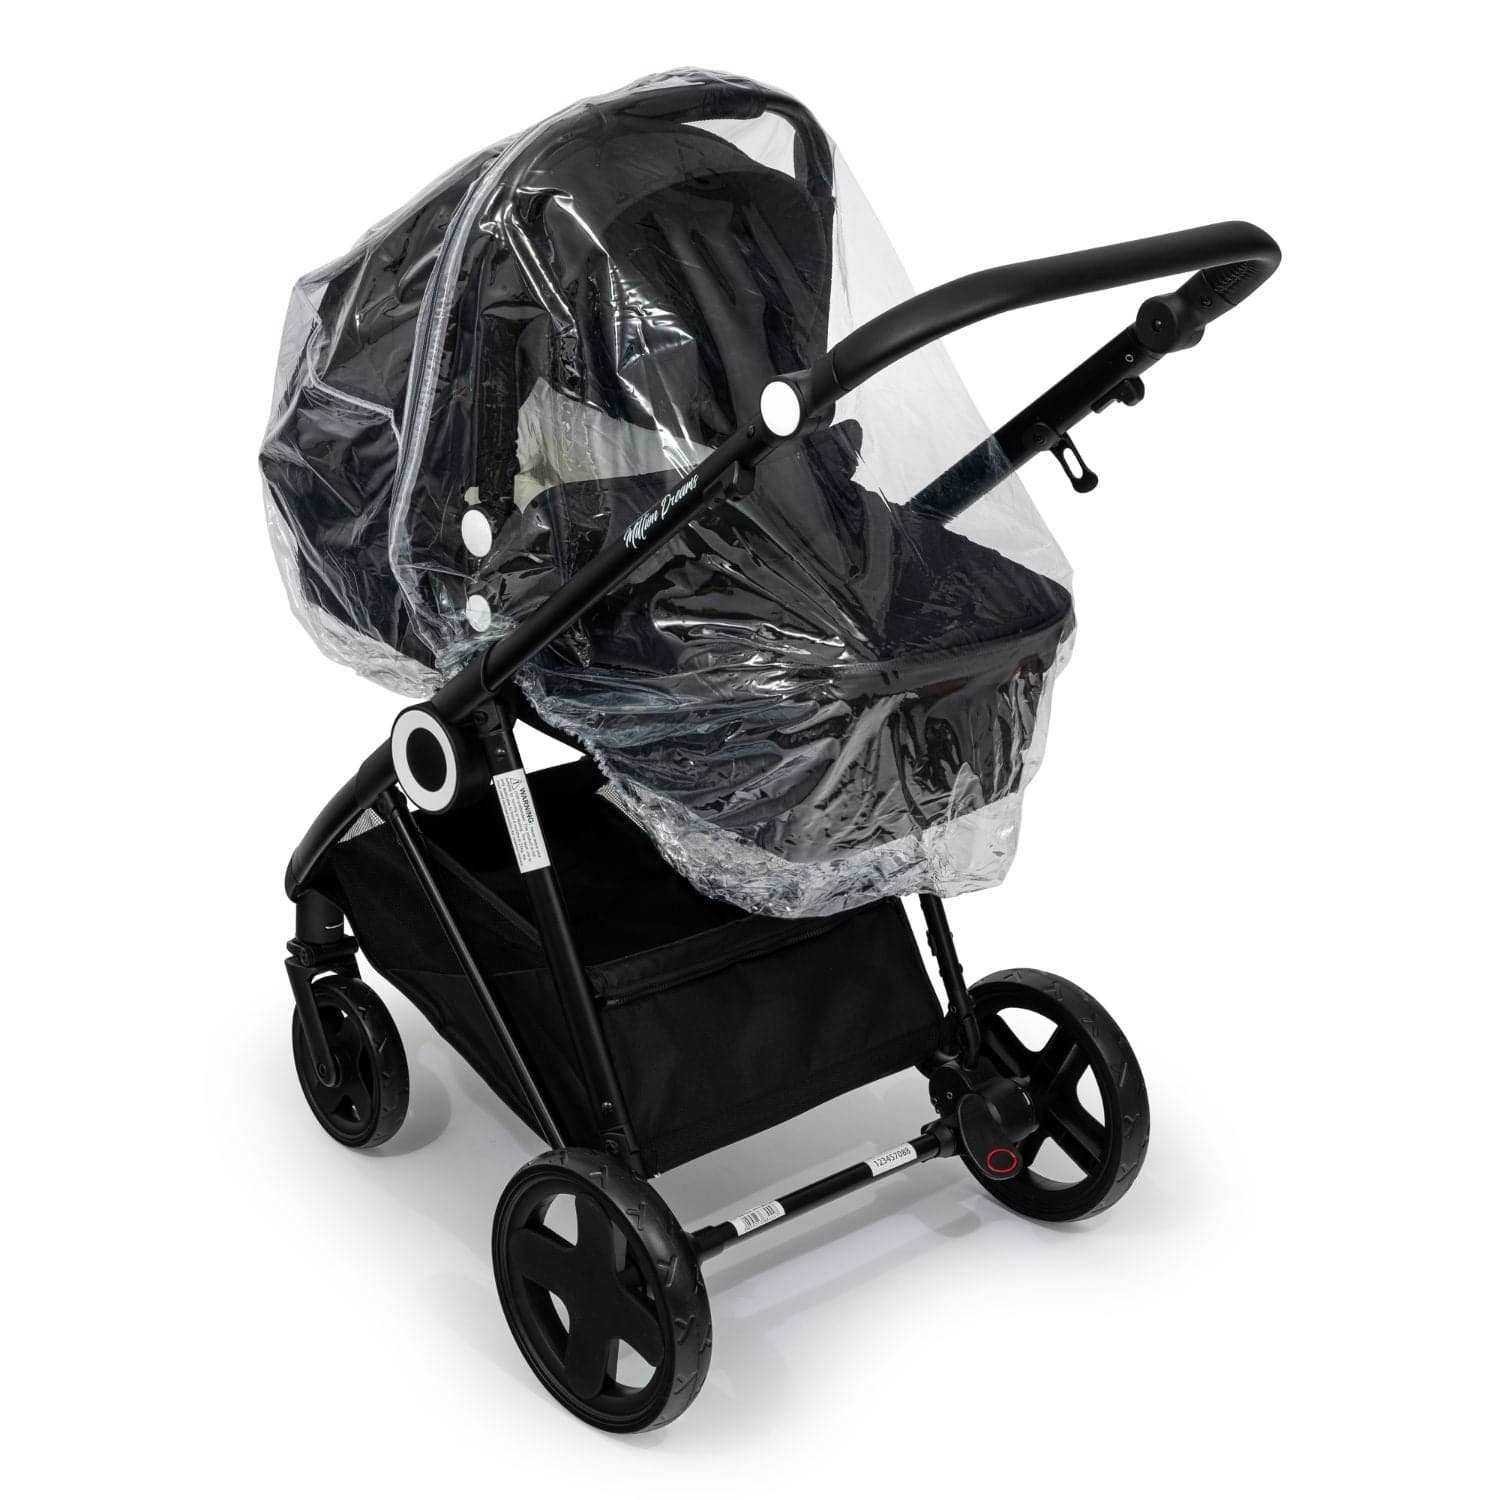 Carrycot Raincover Compatible With Pericles - Fits All Models - For Your Little One